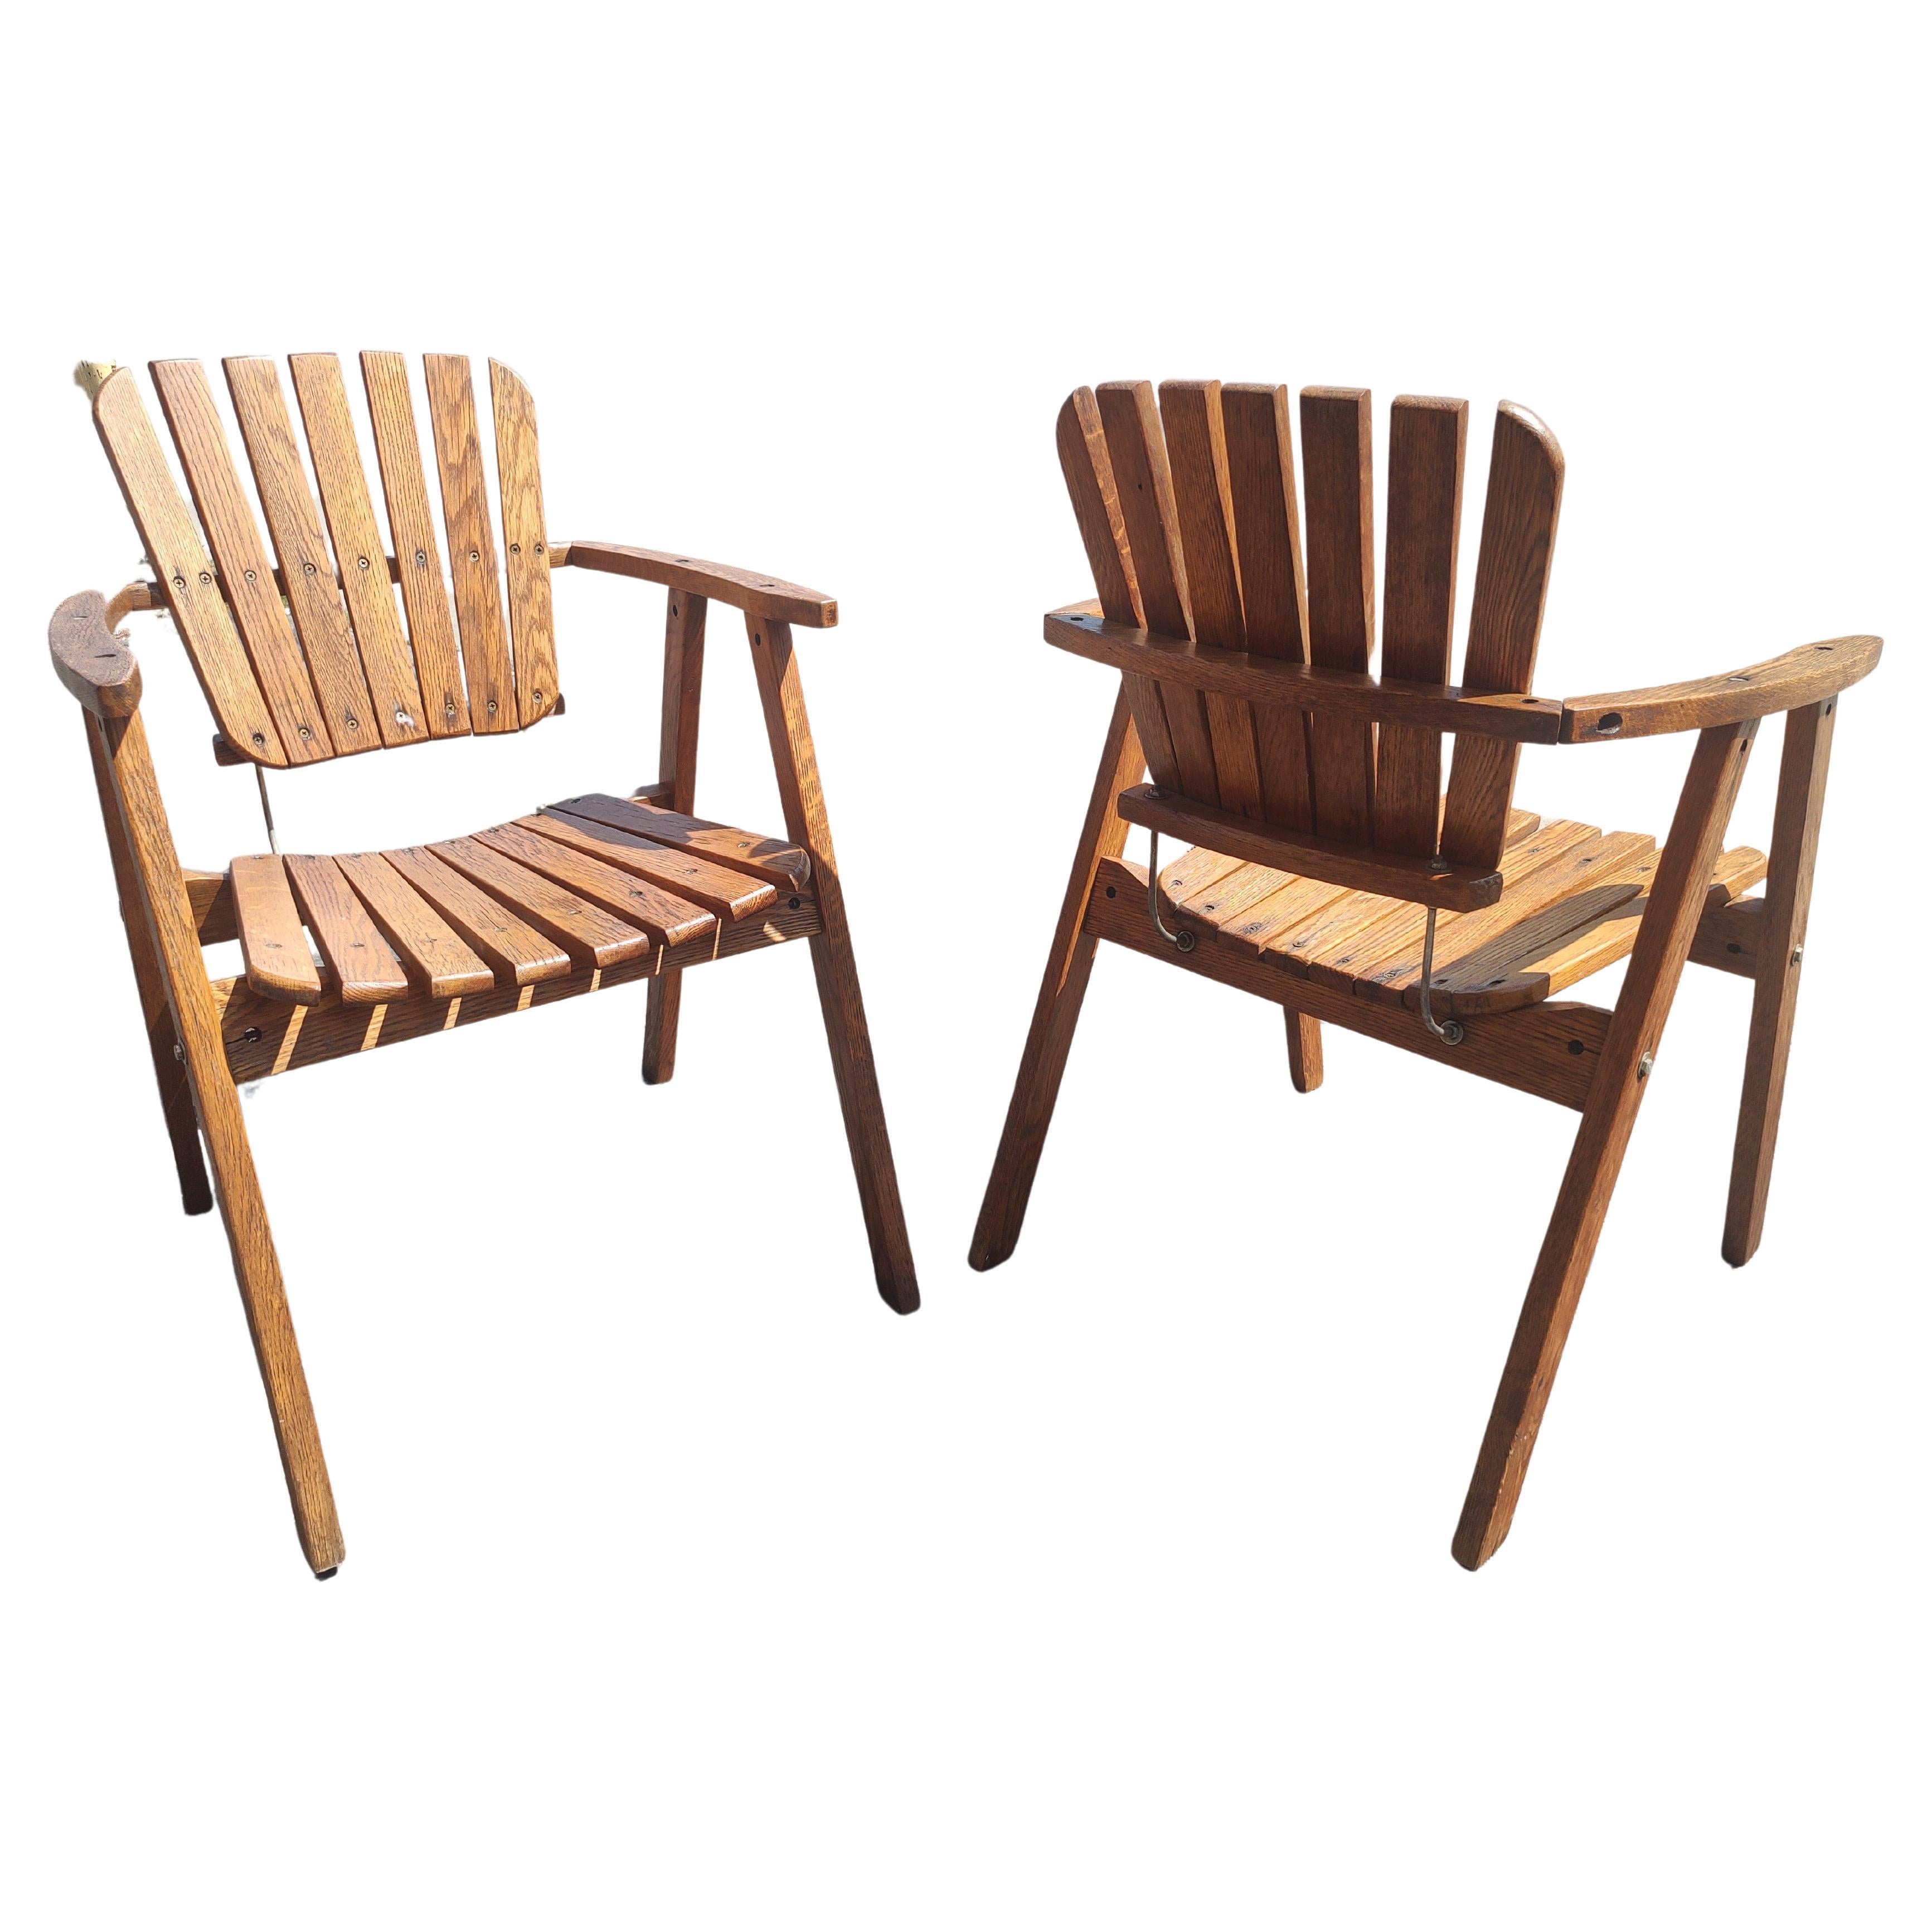 Pair of Mid Century Oak Slatted Armchairs style of Martin Eisler & Carlo Hauner In Good Condition For Sale In Port Jervis, NY